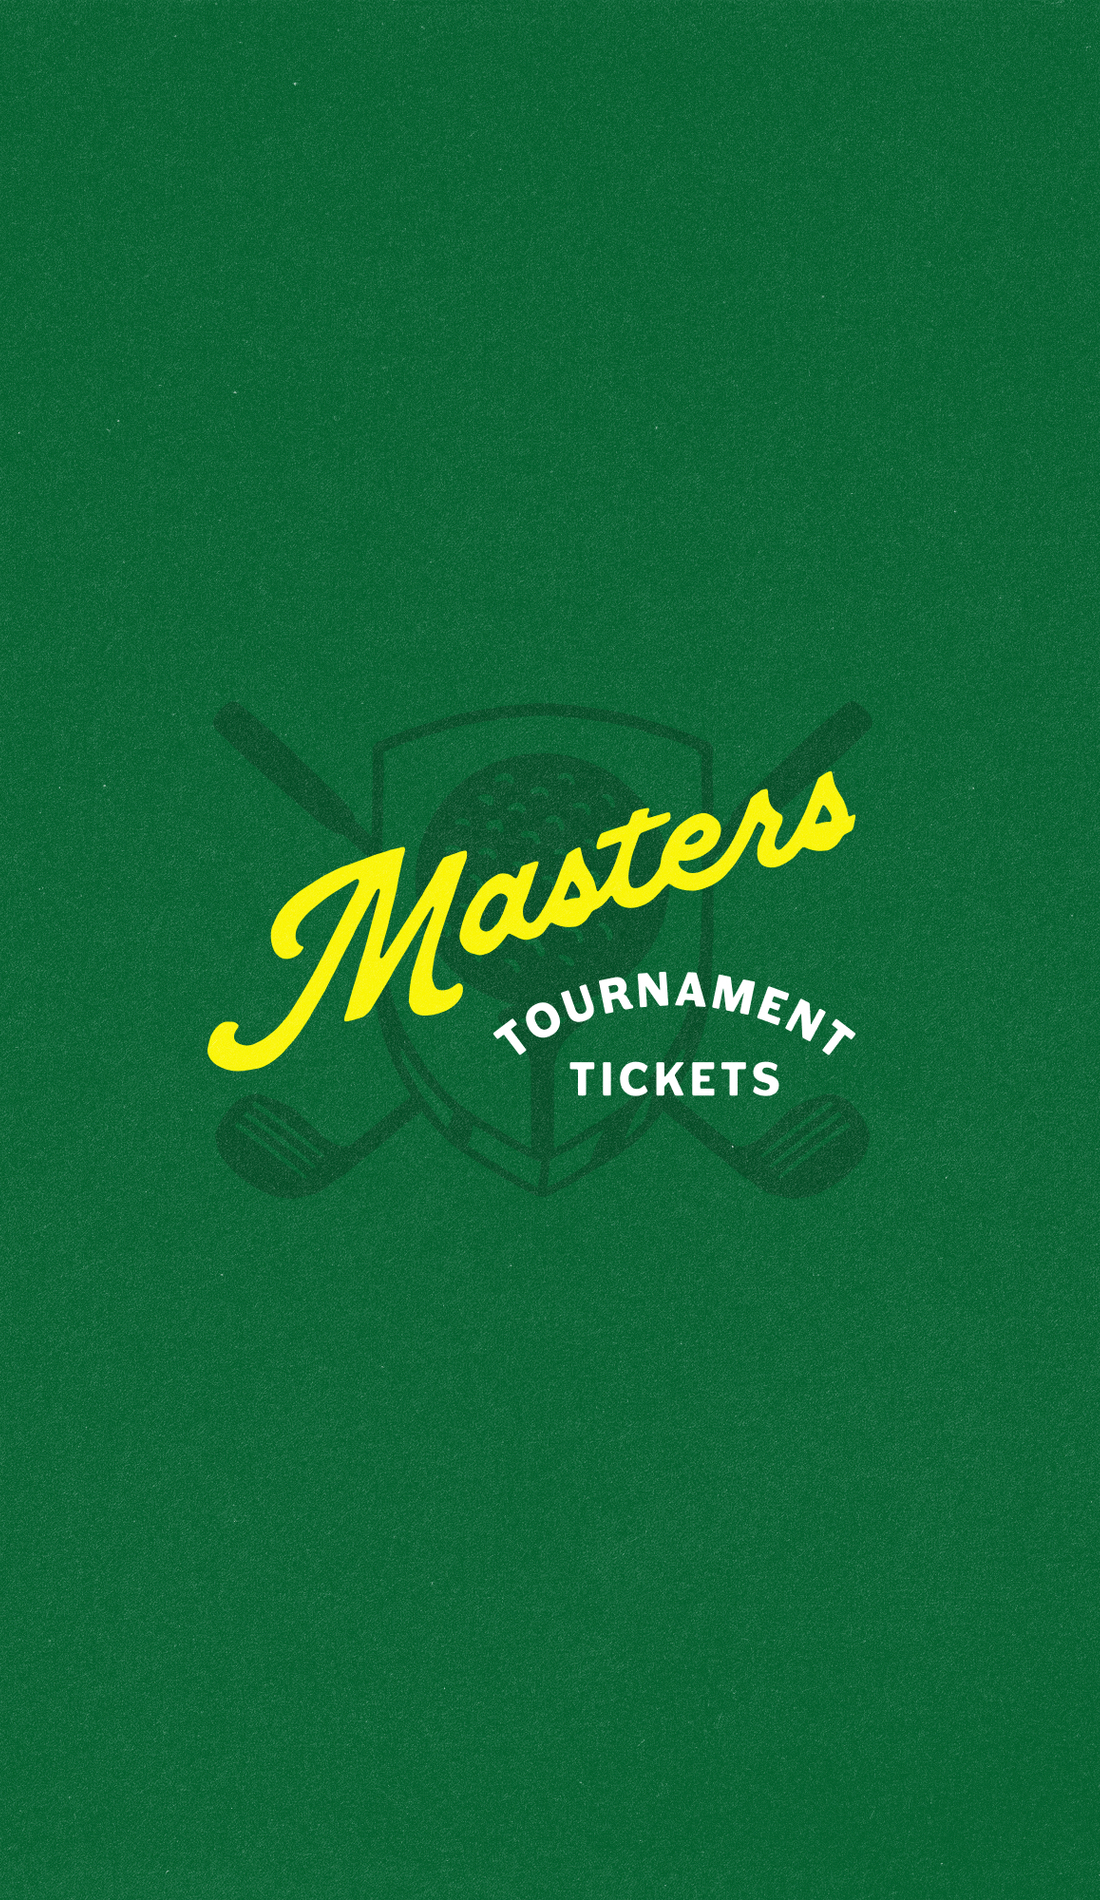 A The Masters live event